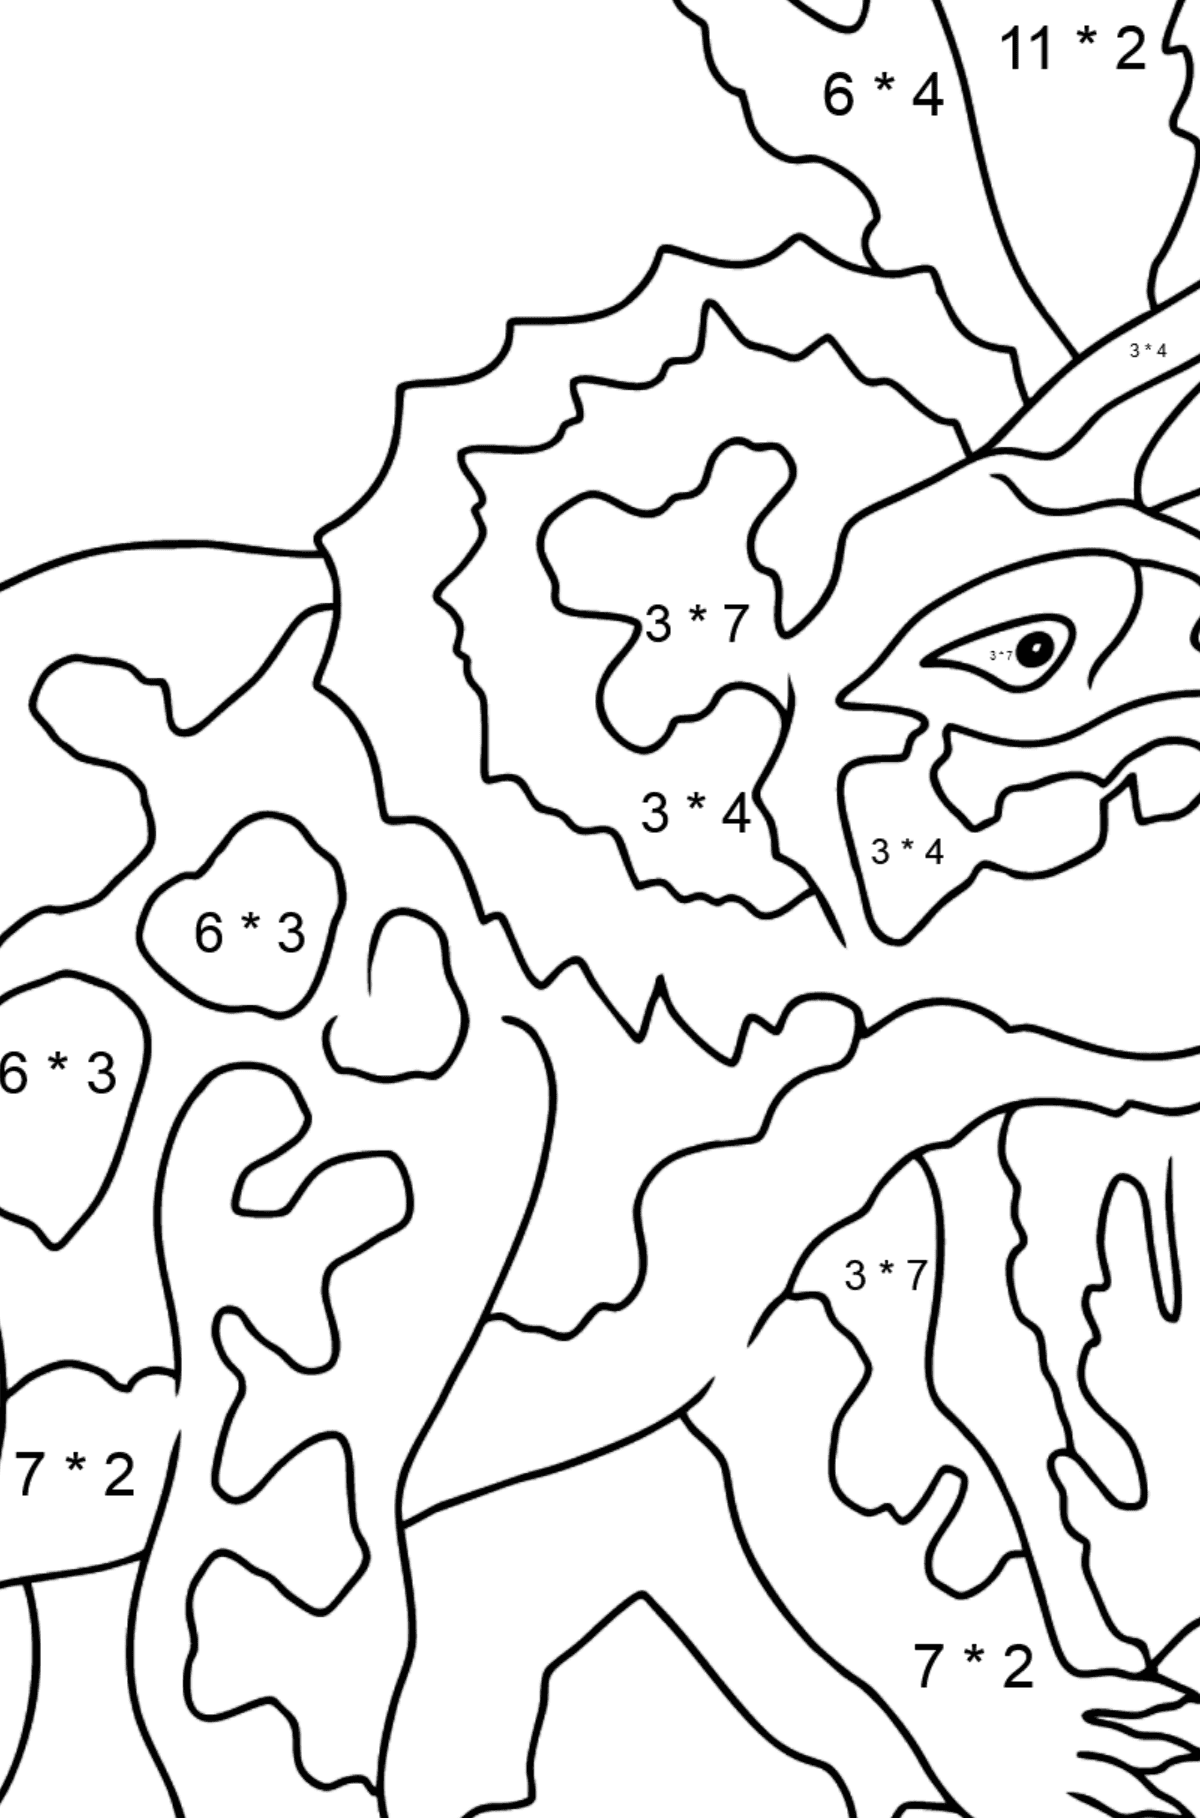 Coloring Page - Triceratops - A Peaceful Horned Dinosaur - Math Coloring - Multiplication for Kids